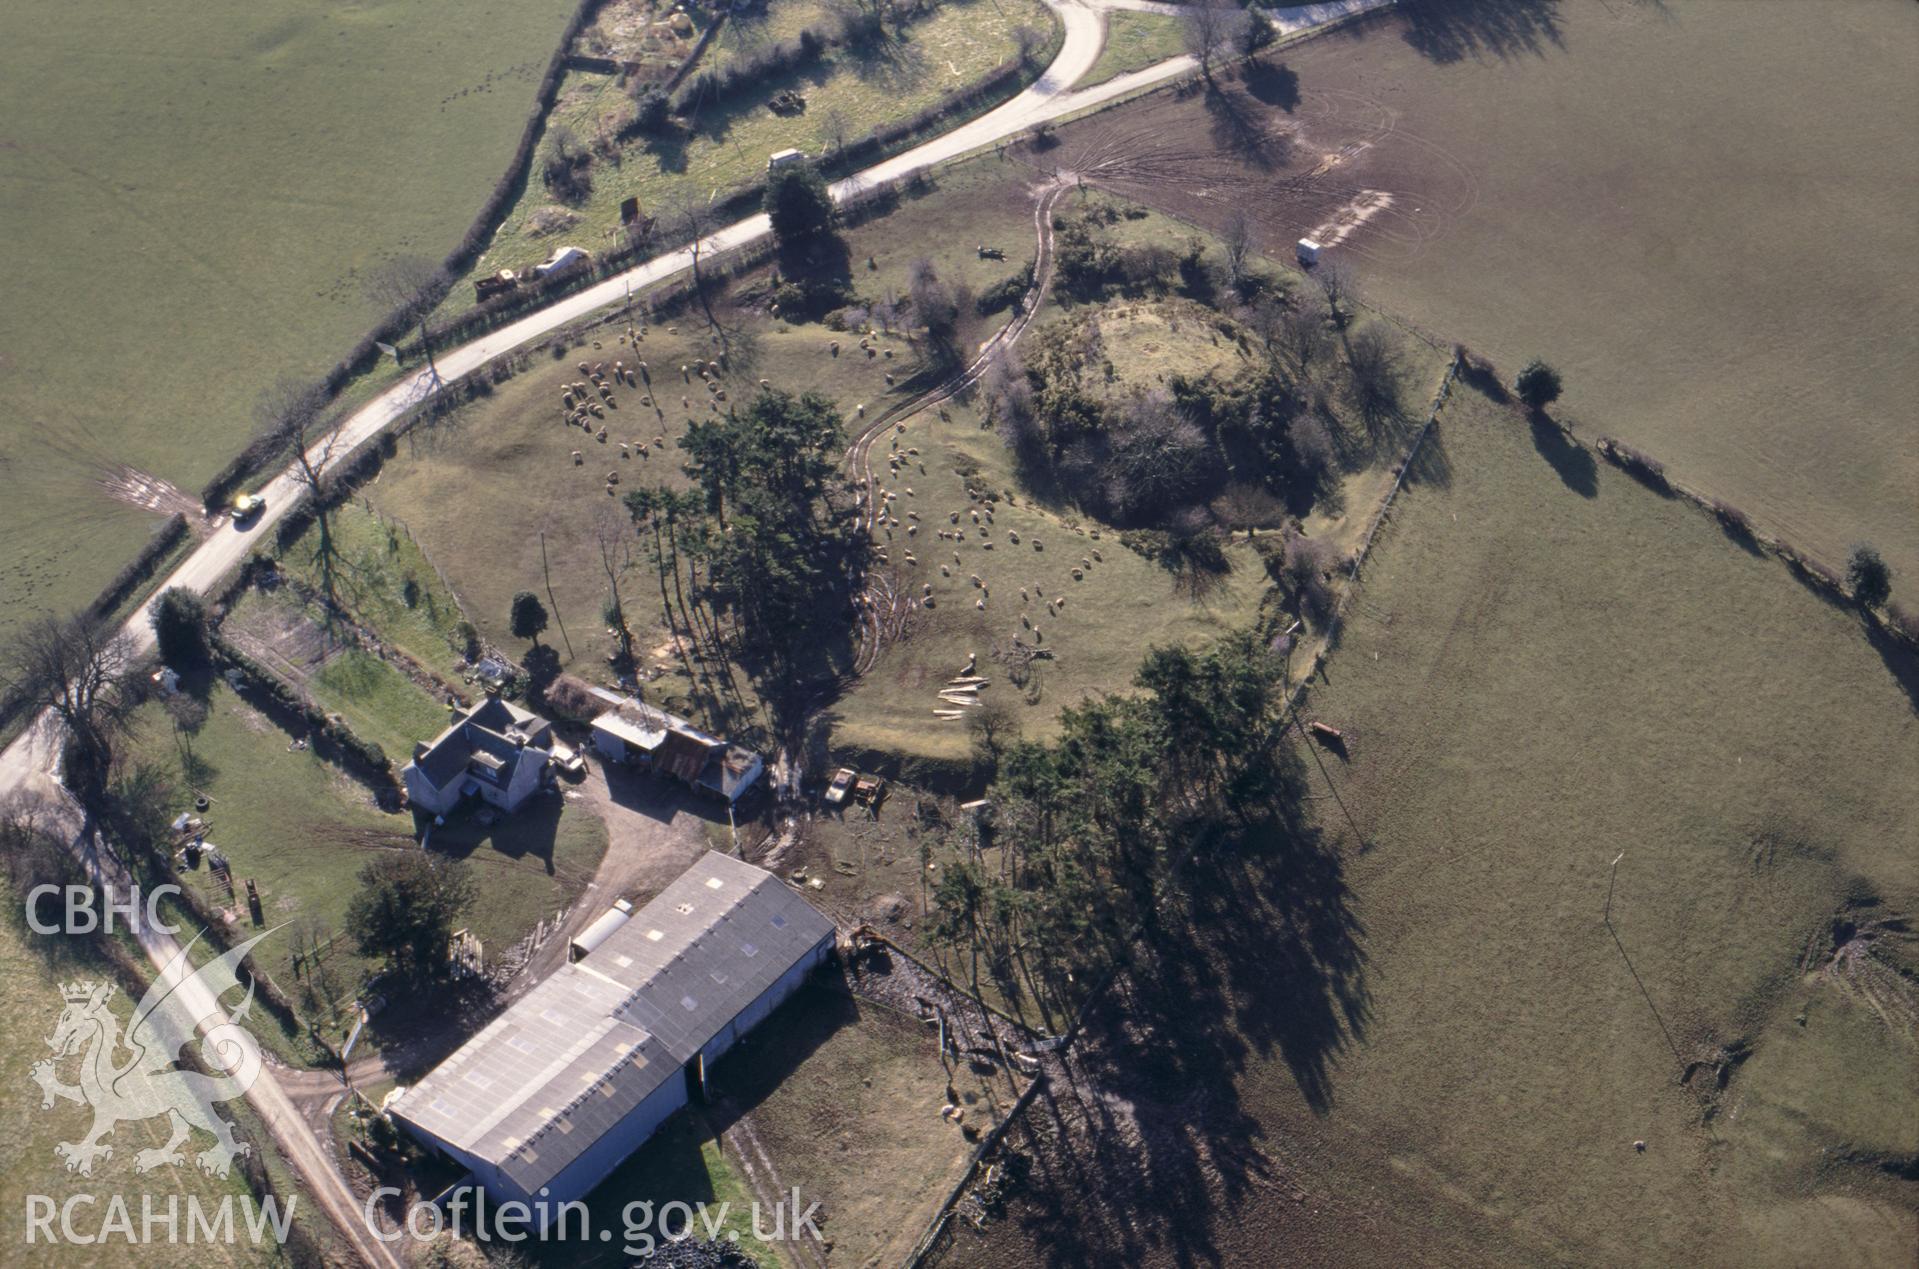 RCAHMW colour oblique aerial photograph of Bishop's Moat taken on 13/03/1995 by C.R. Musson